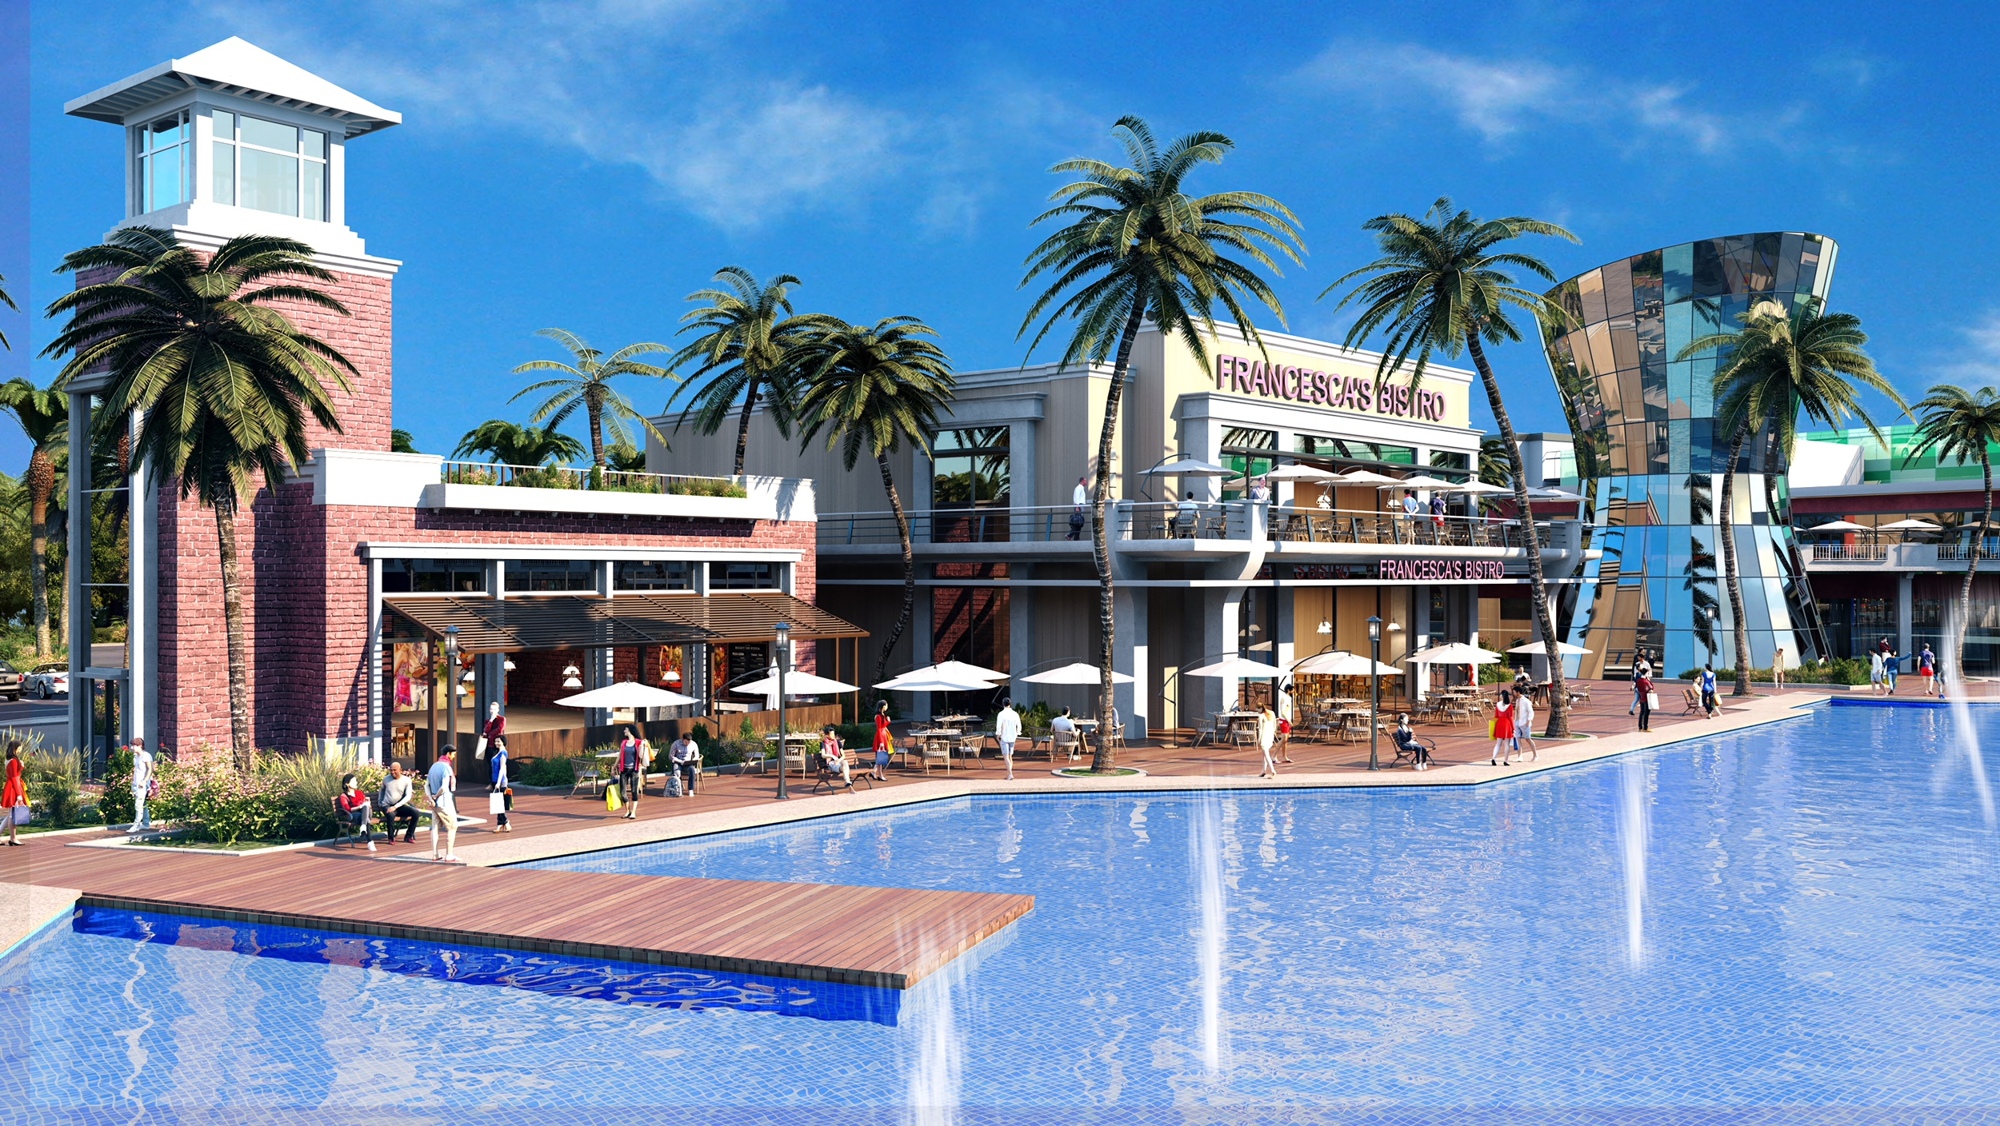 O-Town West will be a mixed use development that will feature a variety of restaurants.